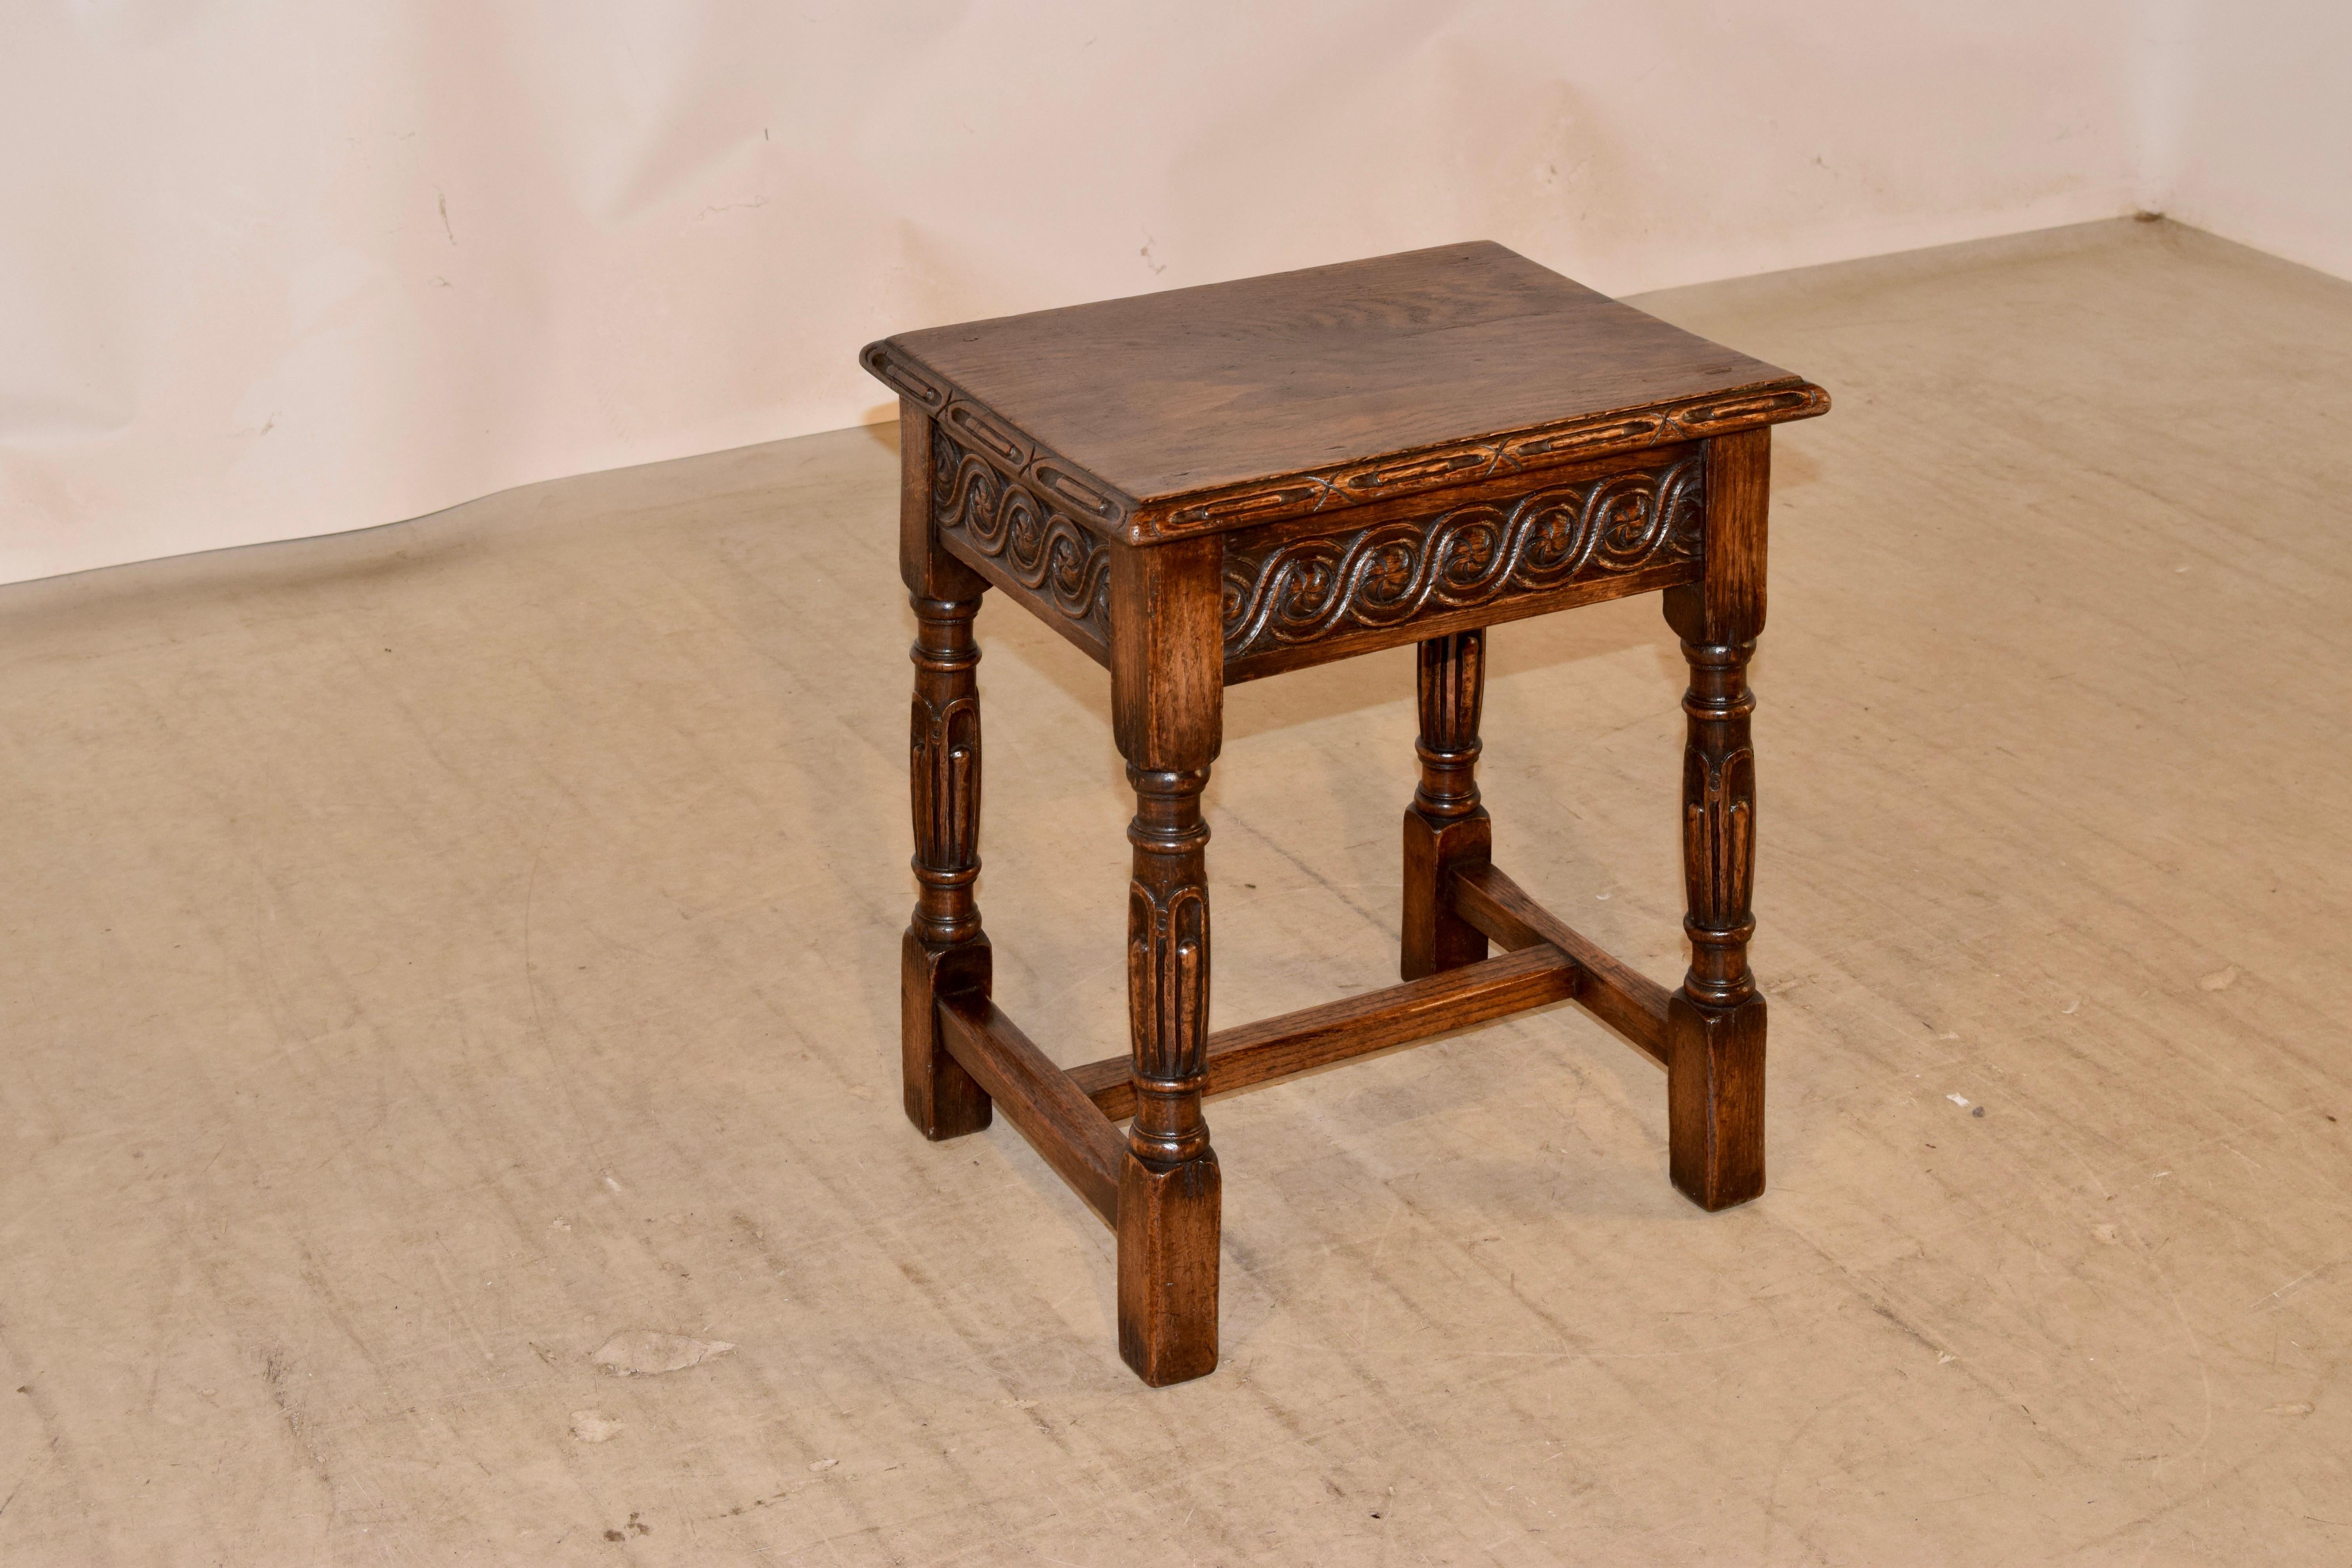 19th century English oak stool with a wonderfully hand carved and beveled edge around the top, over a carved decorated apron and supported on hand turned and carved legs, joined by simple stretchers.